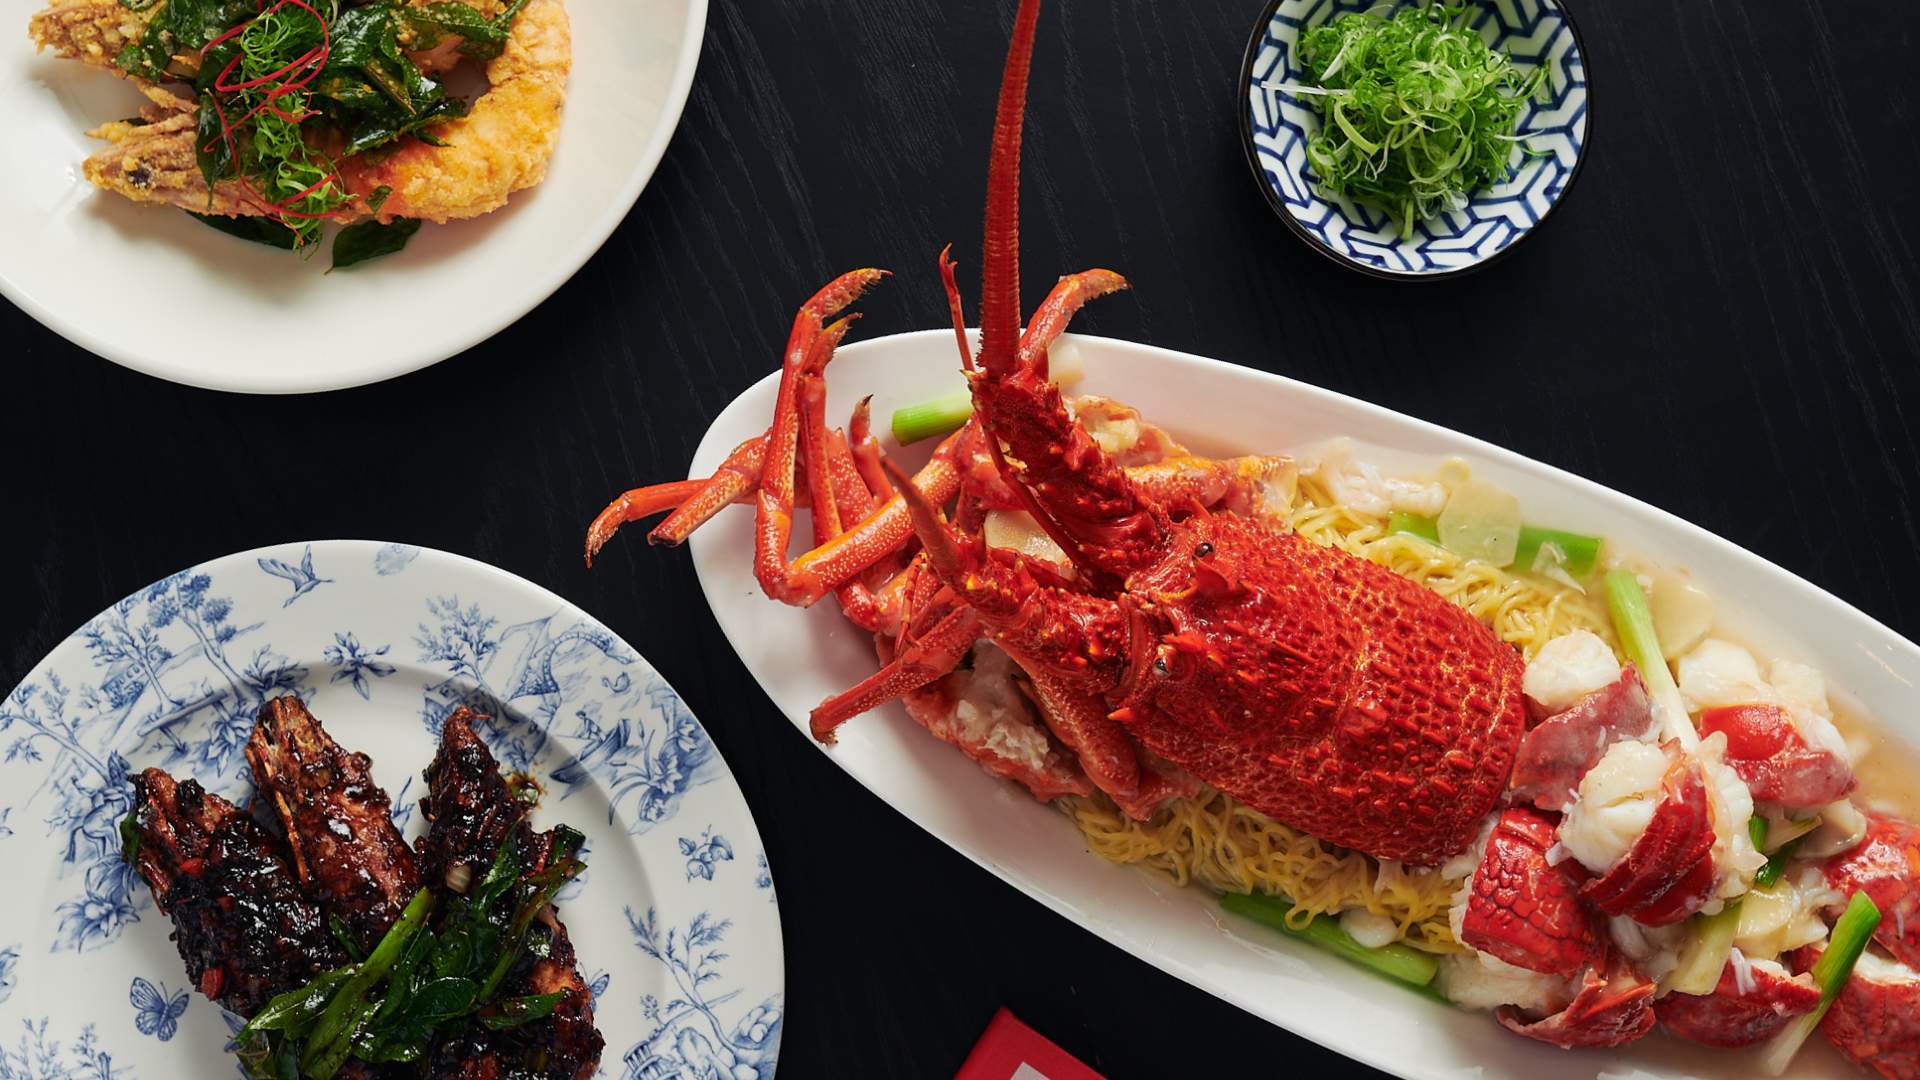 The Best Melbourne Restaurants for an Excellent Lunar New Year Feast